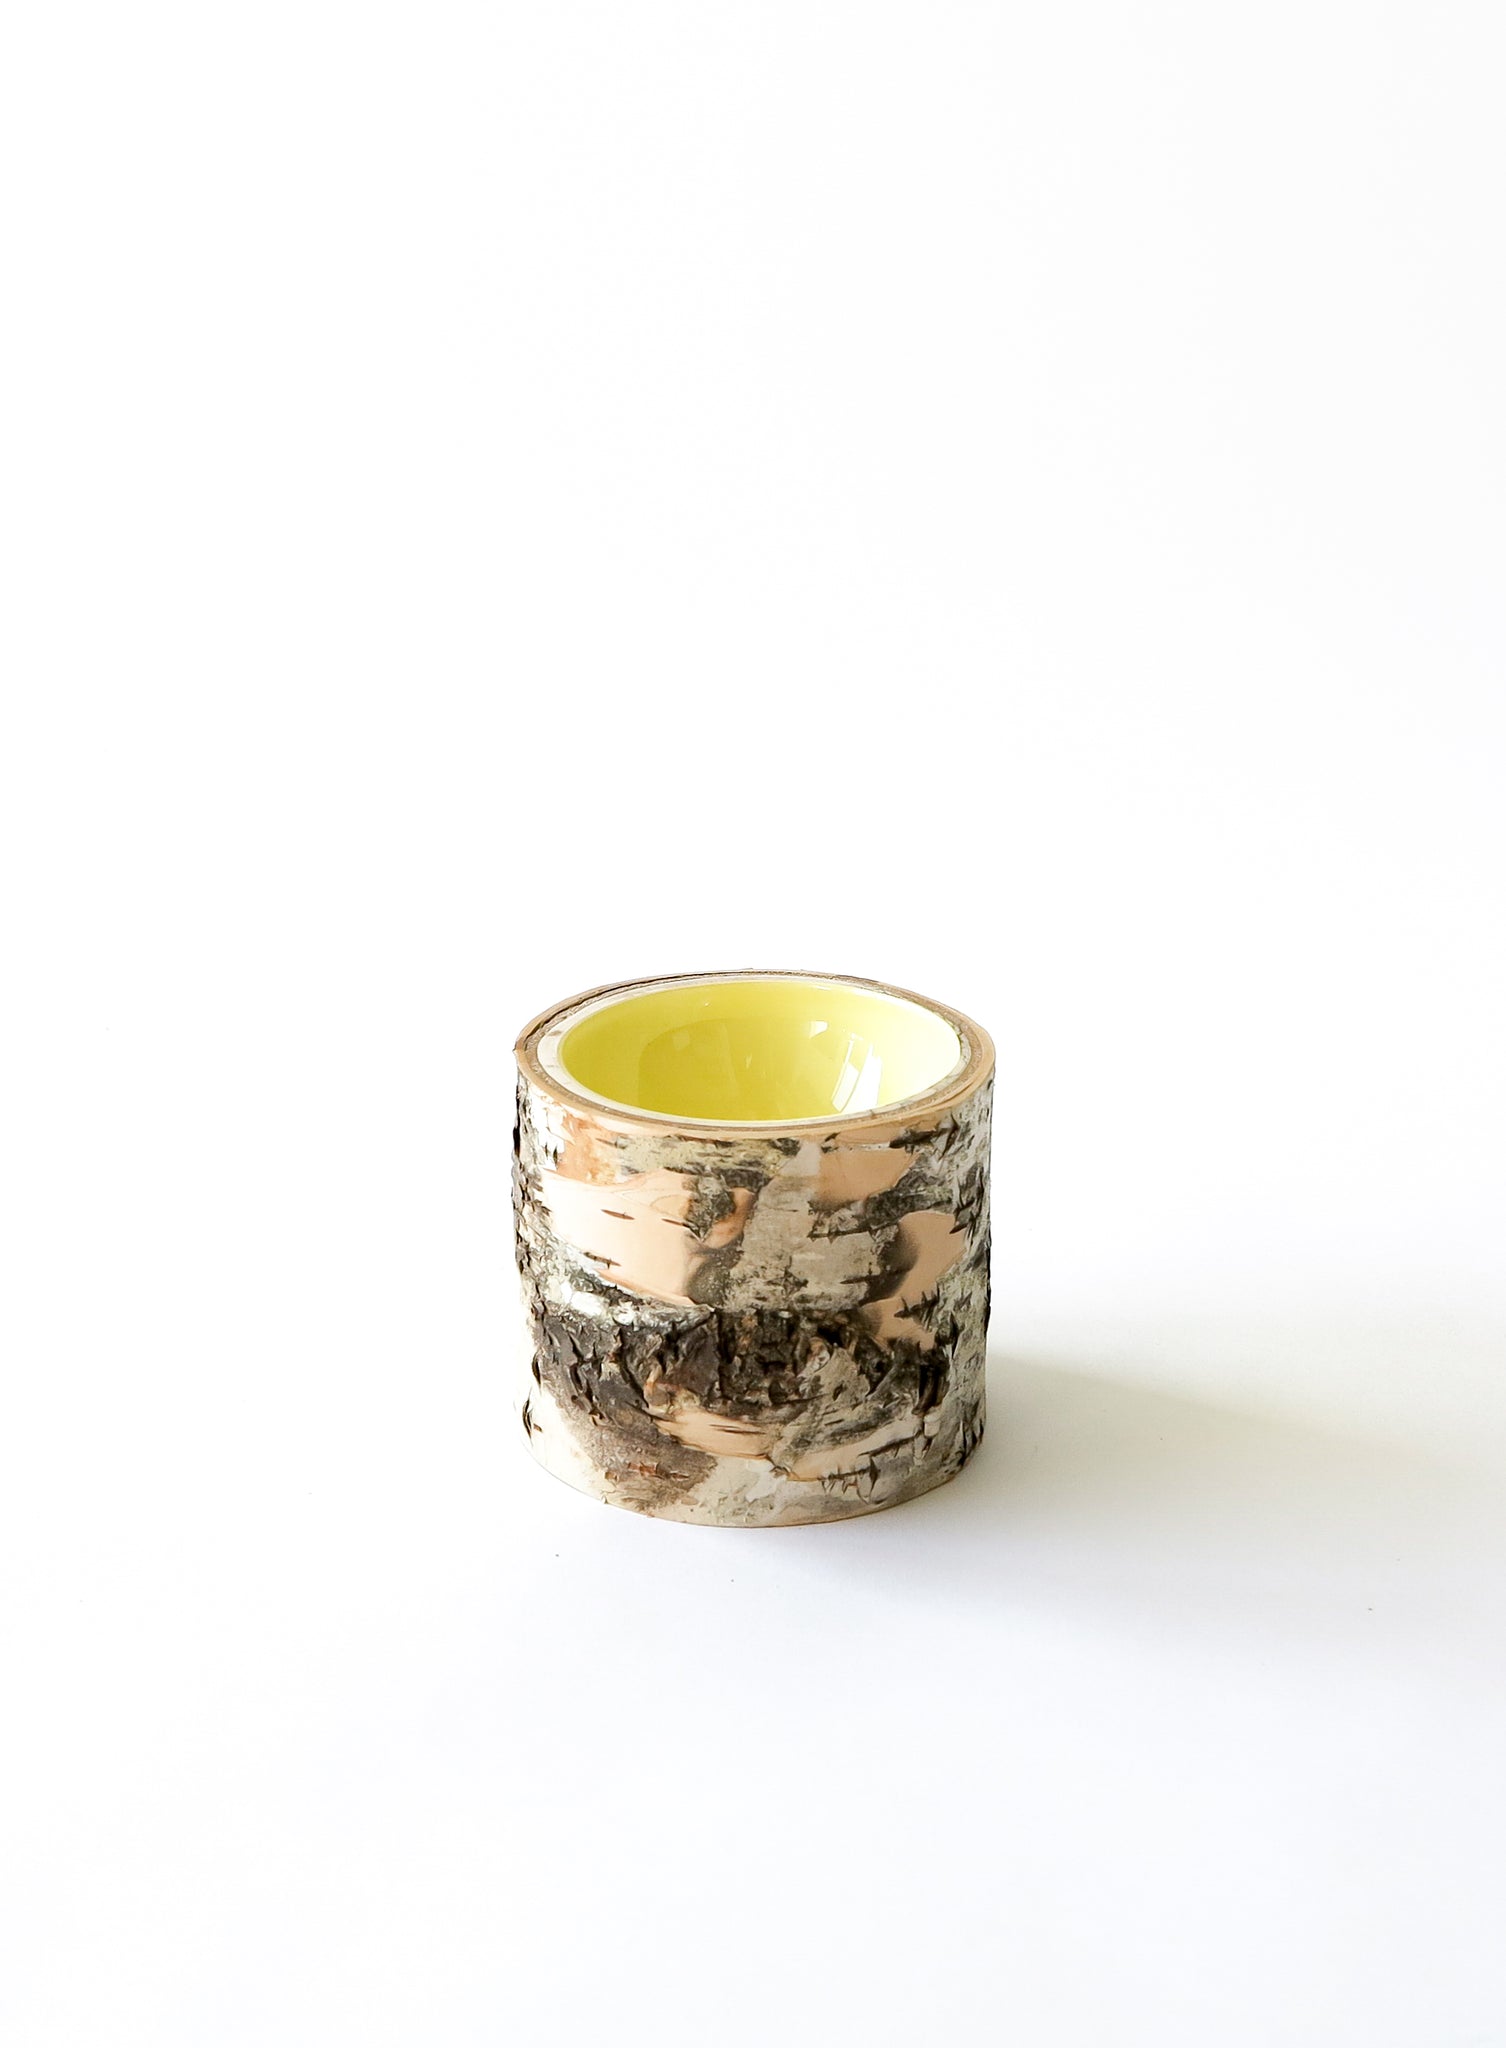 Alternative angle of Size 3 Log Bowl - small wooden bowl with papery birch bark, glossy interior is a butter yellow colour.